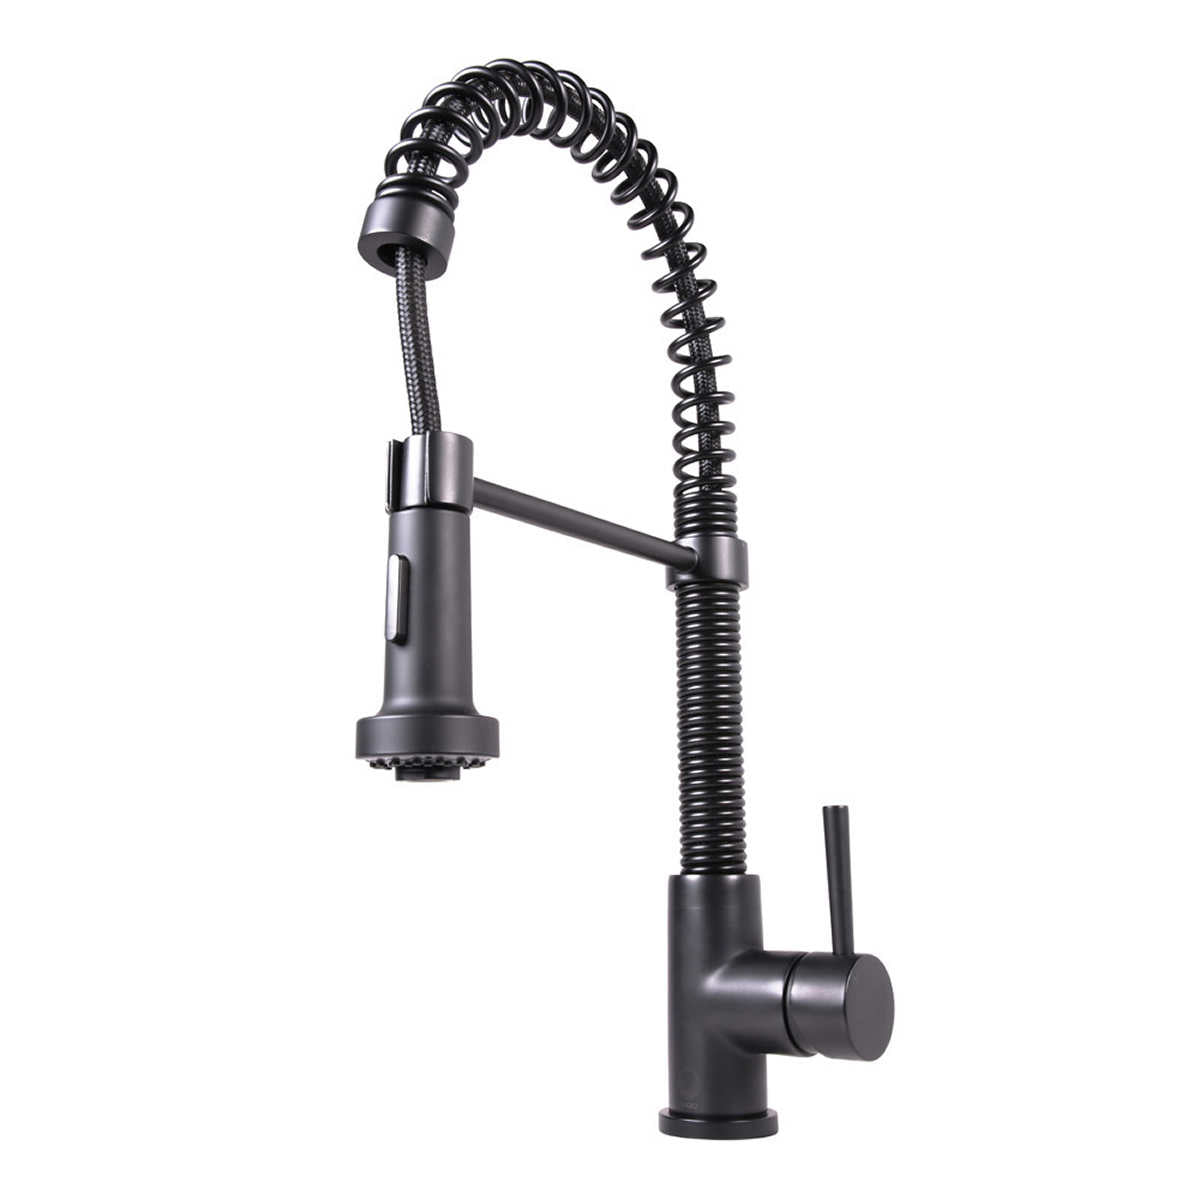 PULL DOWN KITCHEN FAUCET